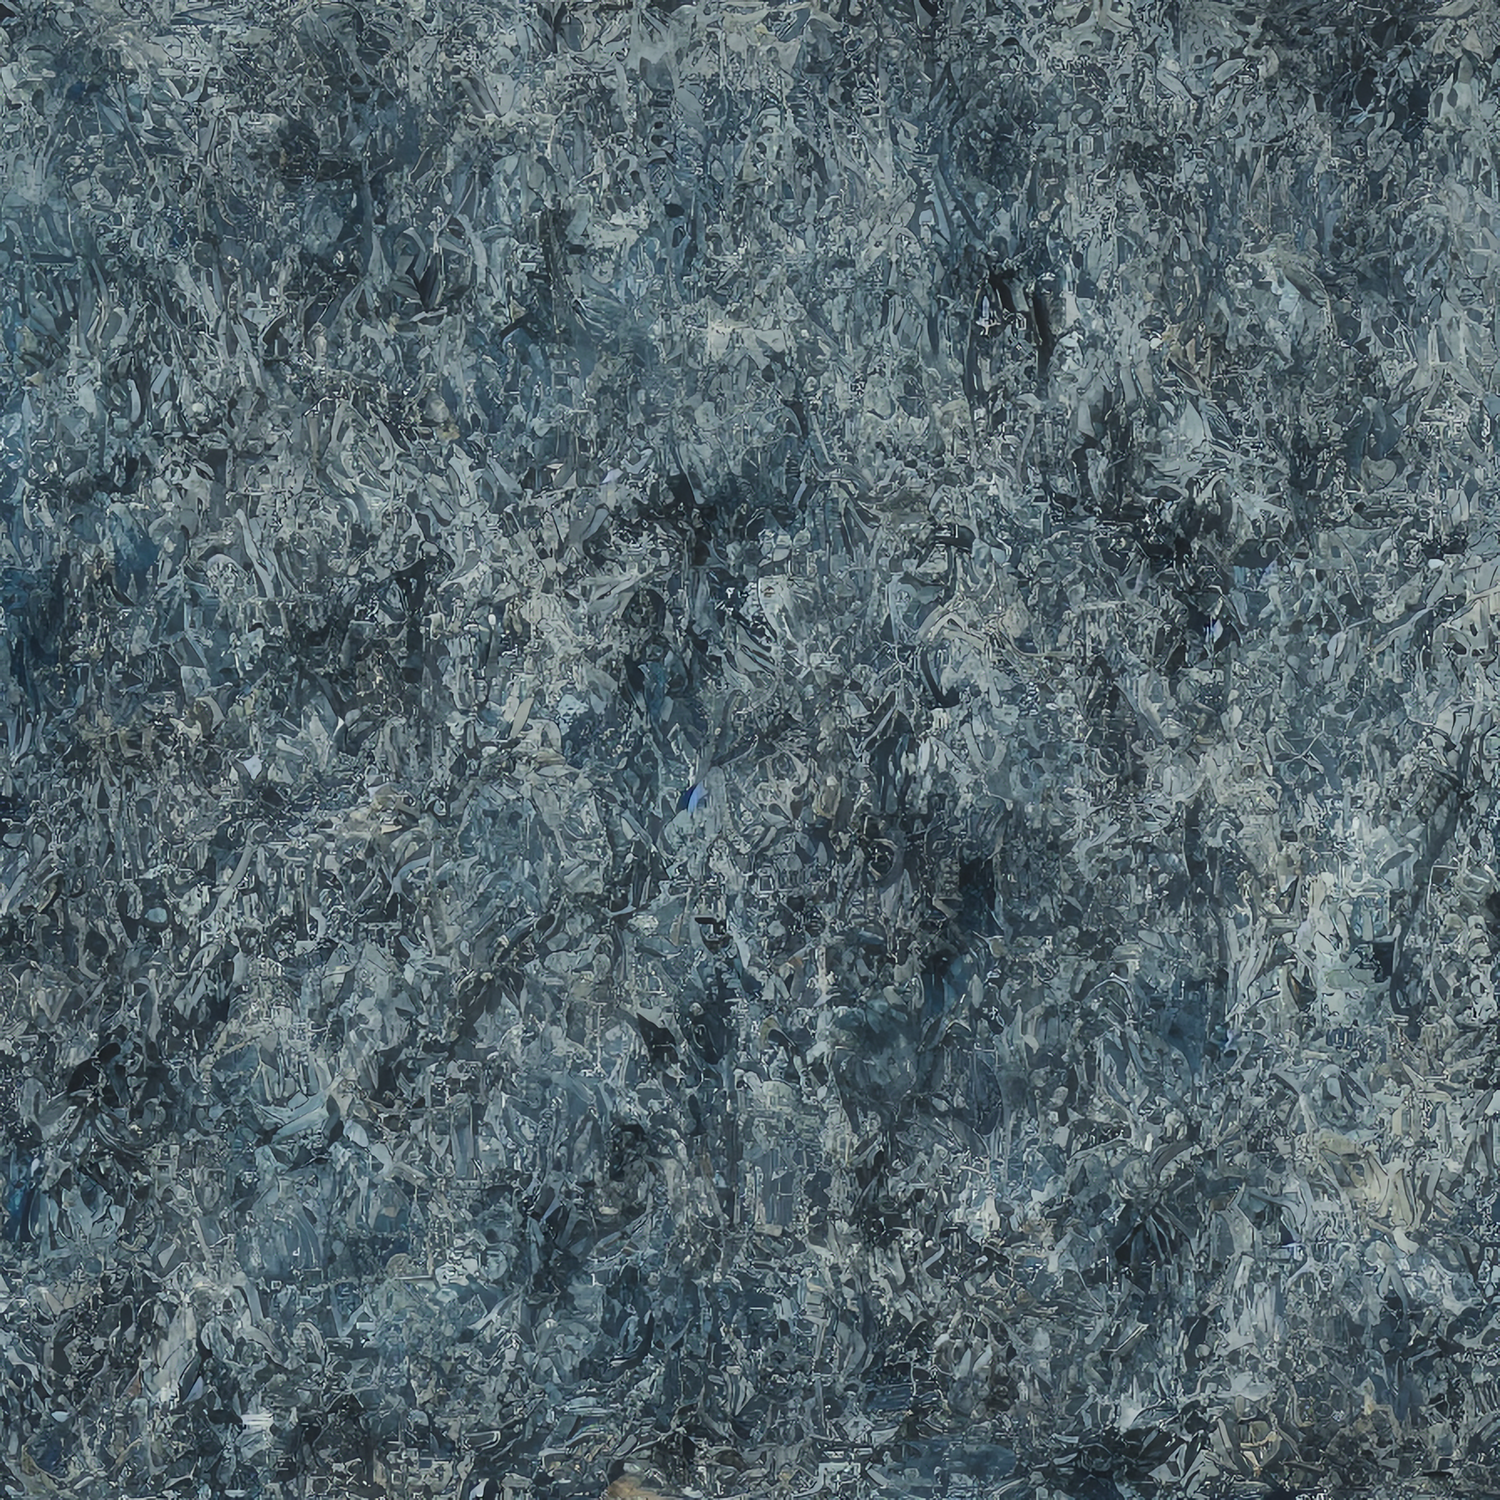 Abstract image with shades of blue and silver.